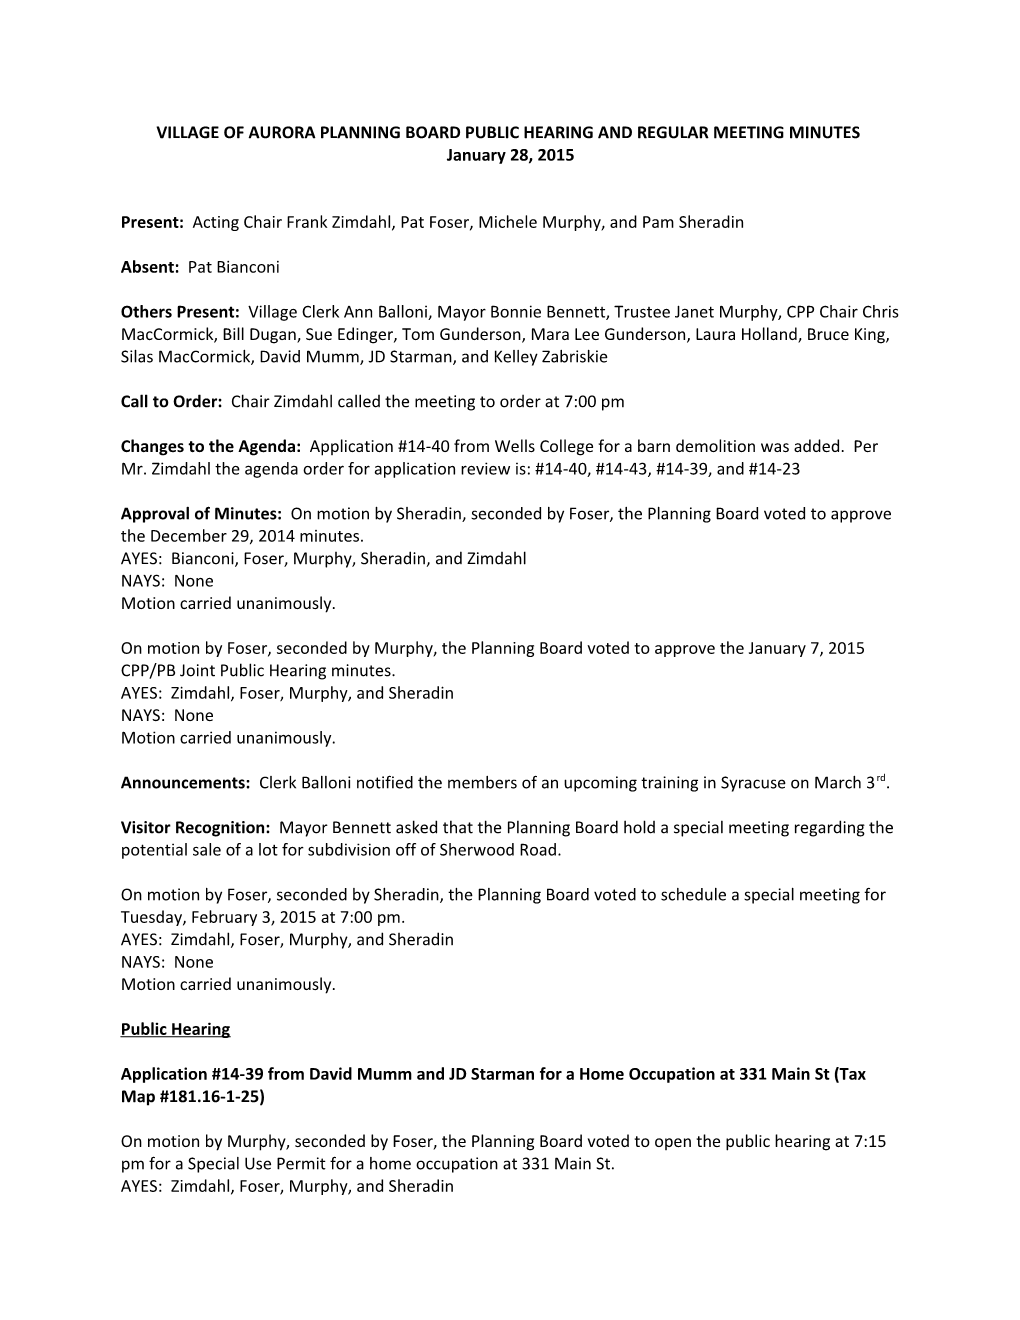 Village of Aurora Planning Board Public Hearing and Regular Meeting Minutes